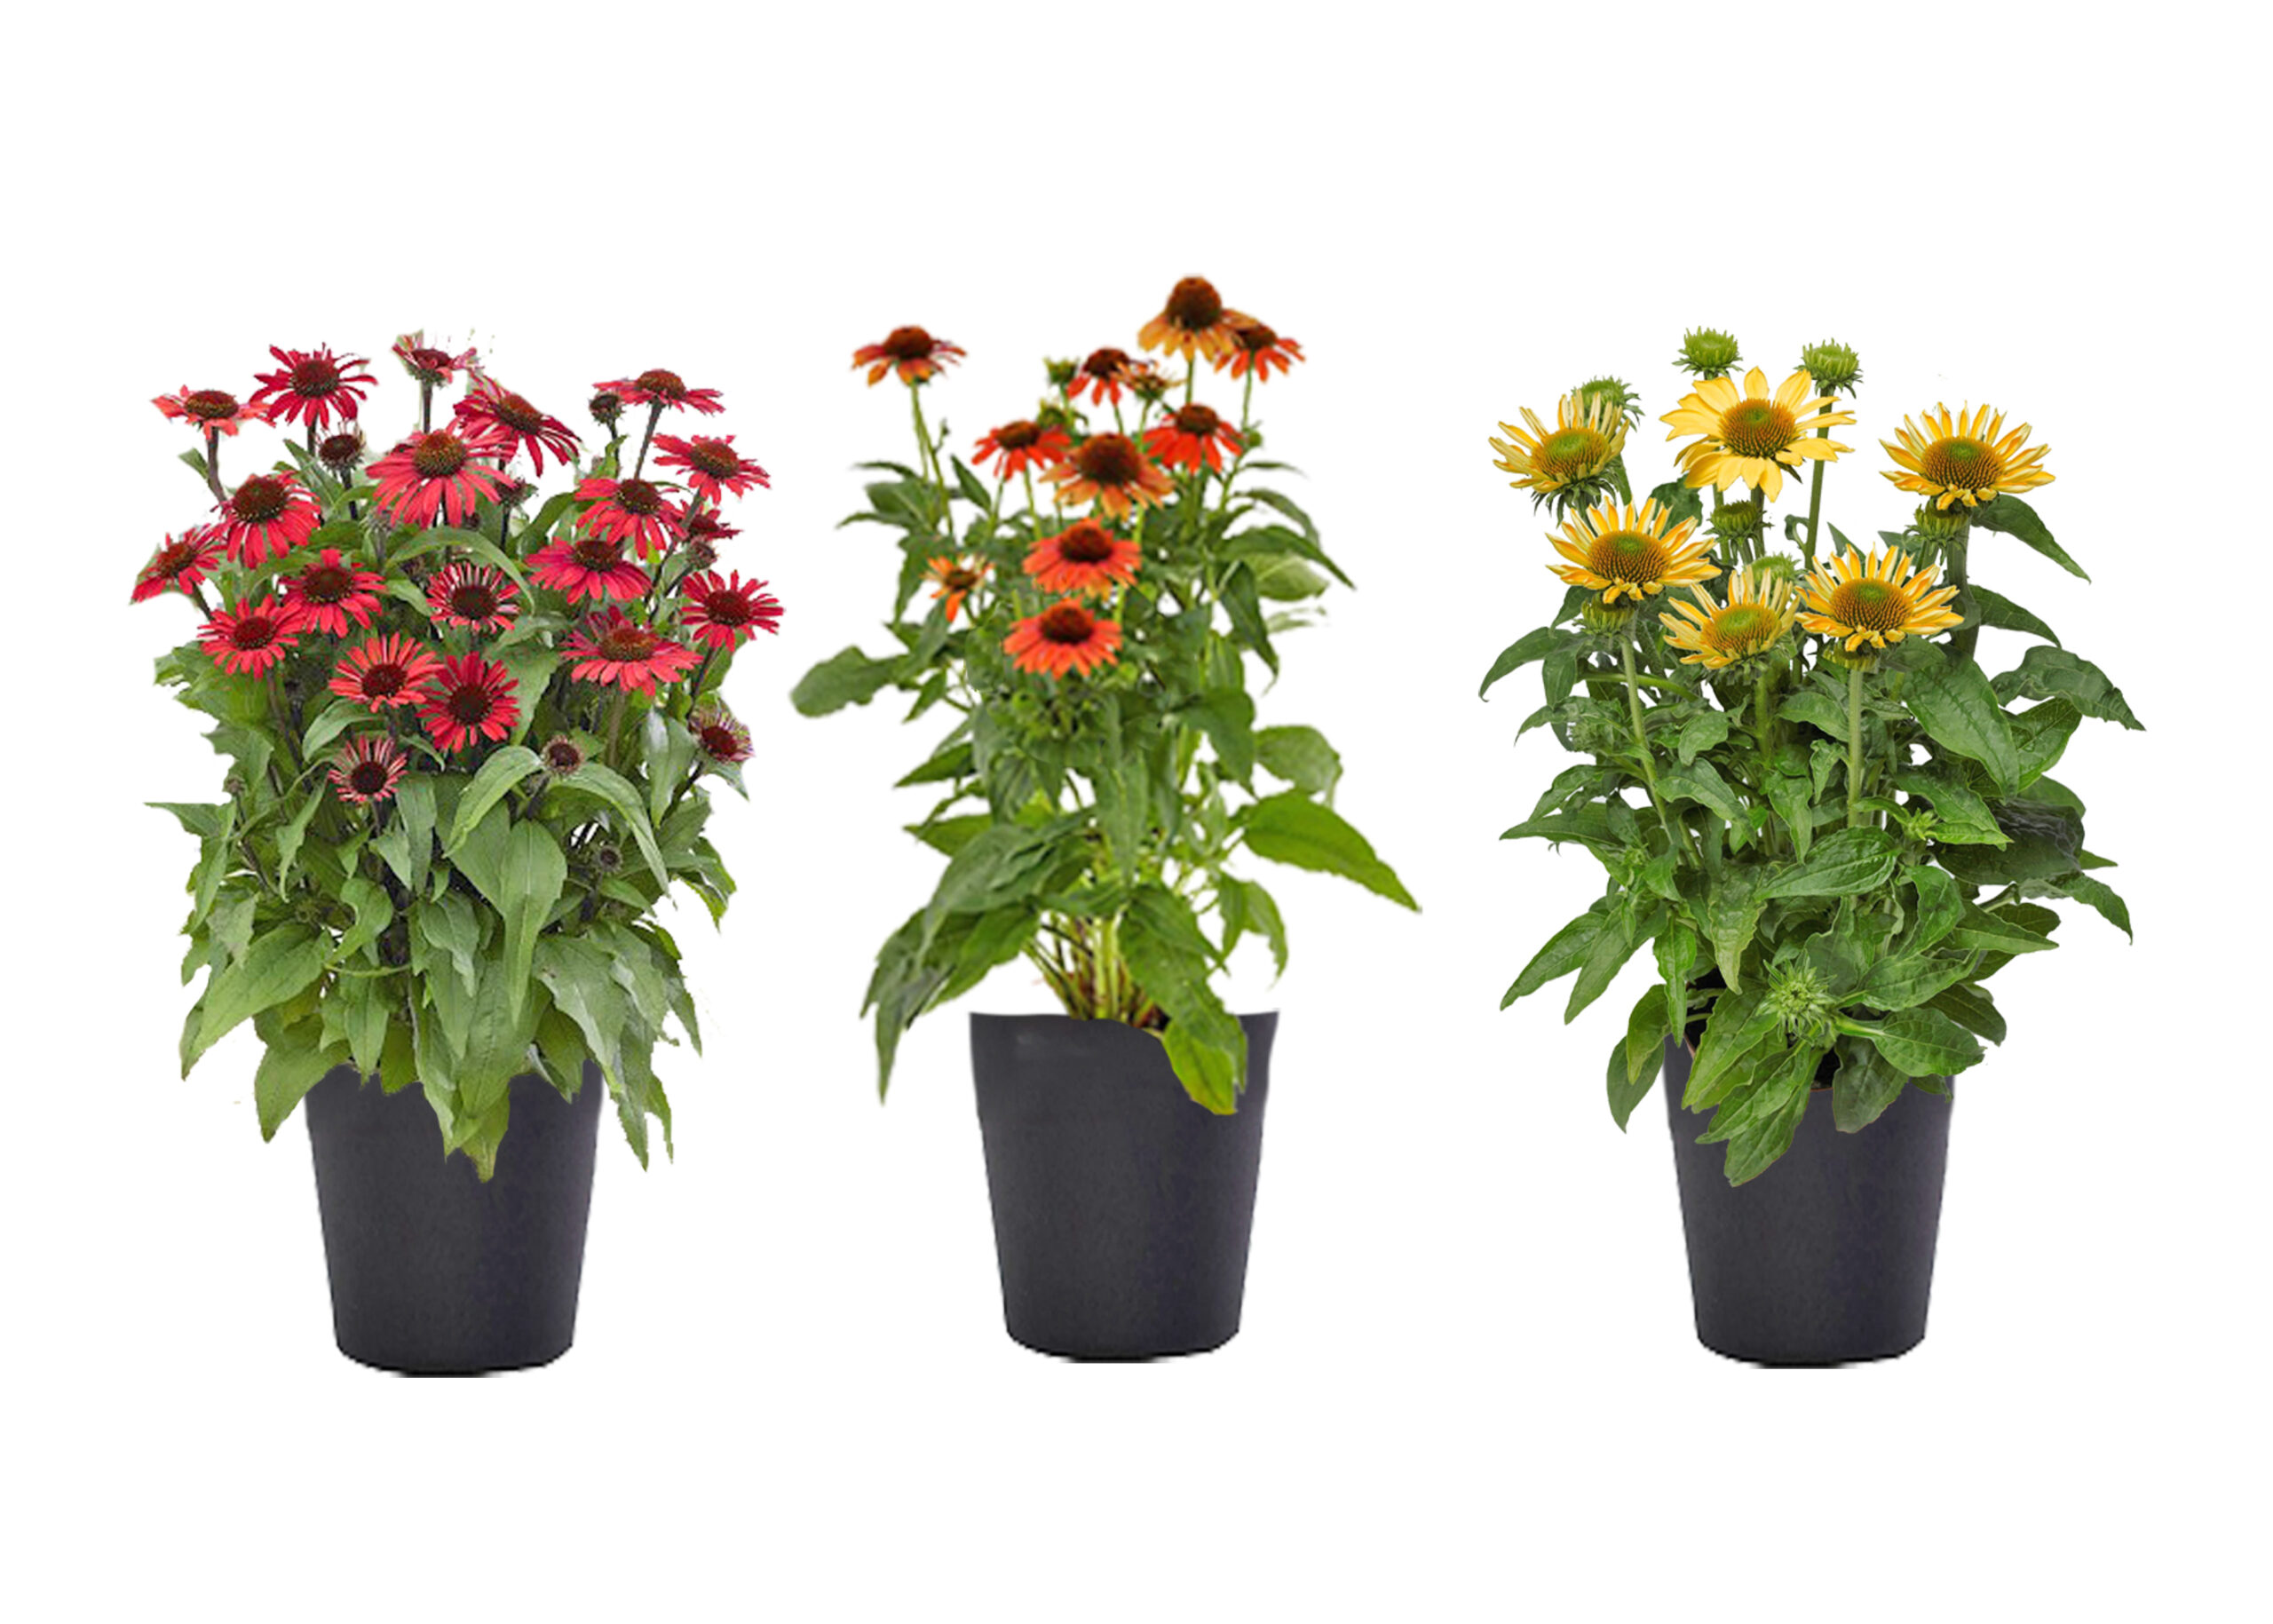 red, orange, and yellow echinacea in black grower pot